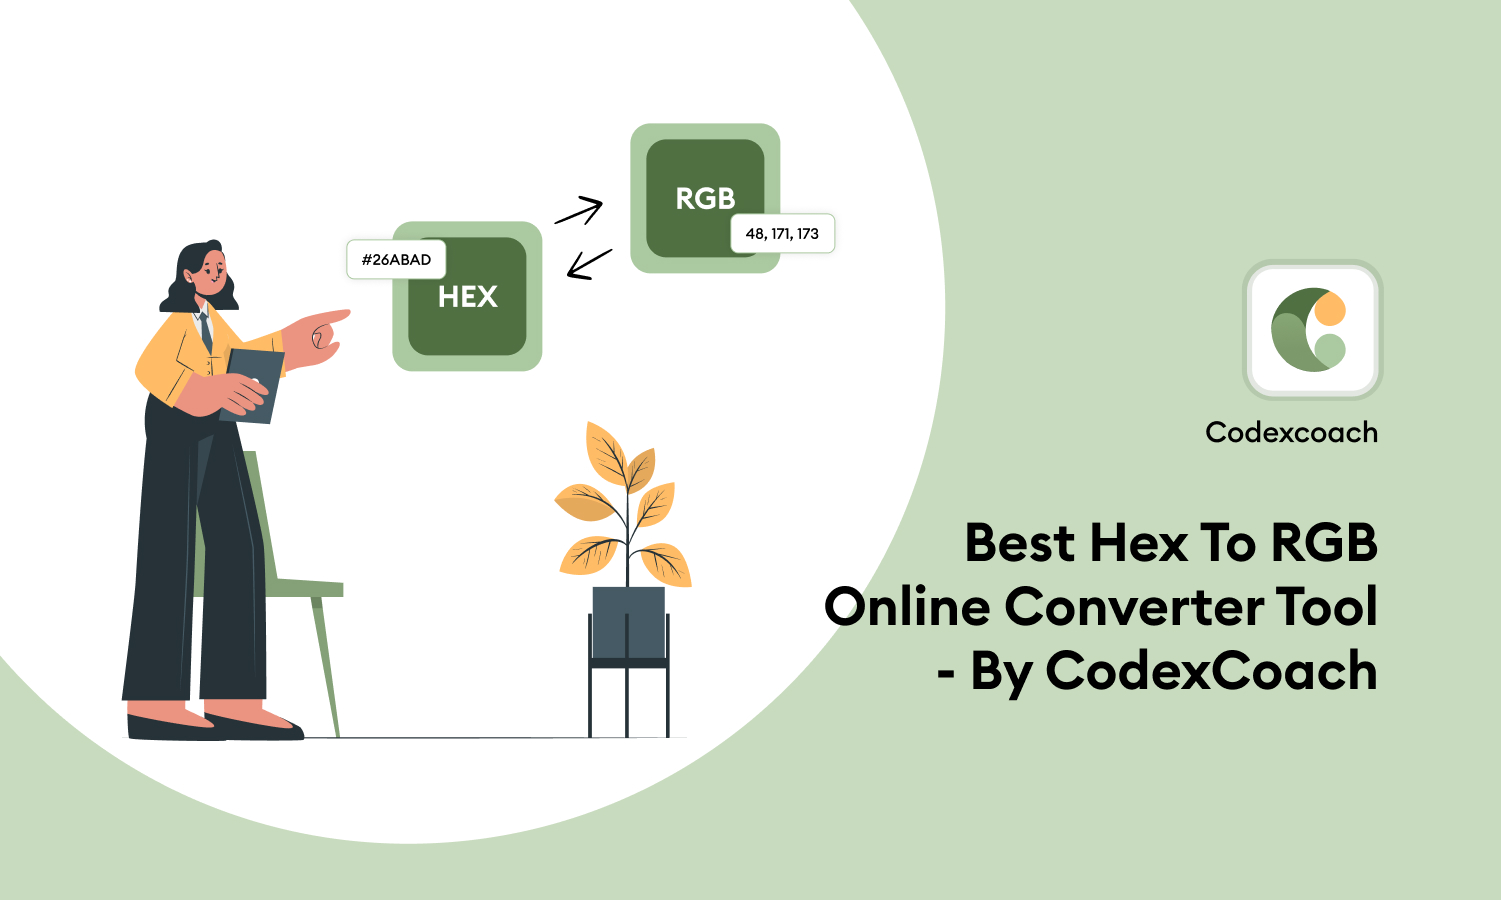 Best Hex To RGB Online Converter Tool - By CodexCoach